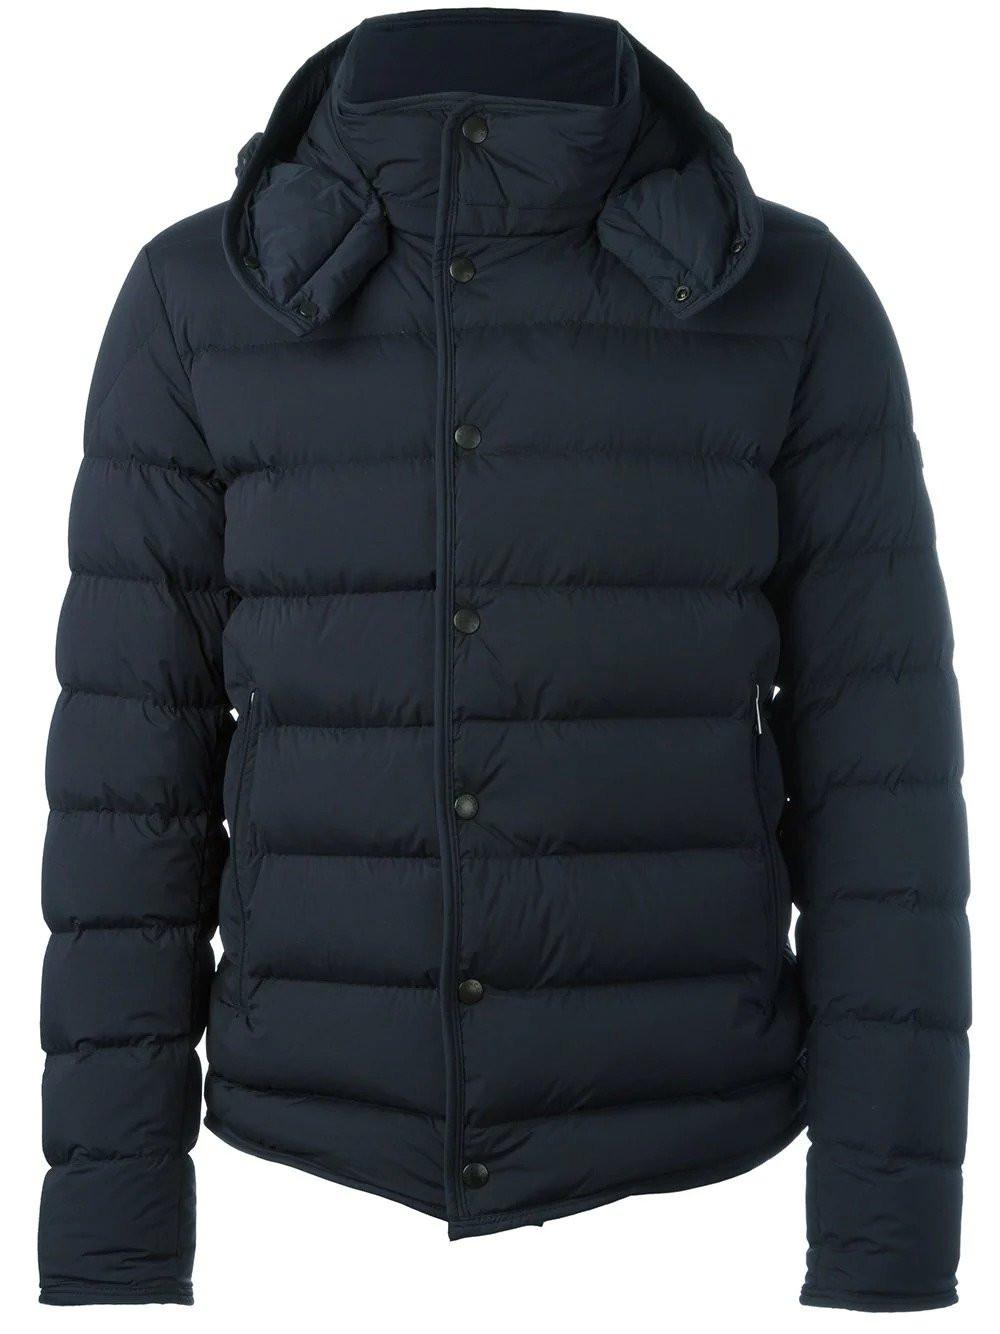 Moncler Synthetic Nazaire Padded Jacket in Blue (Black) for Men - Lyst